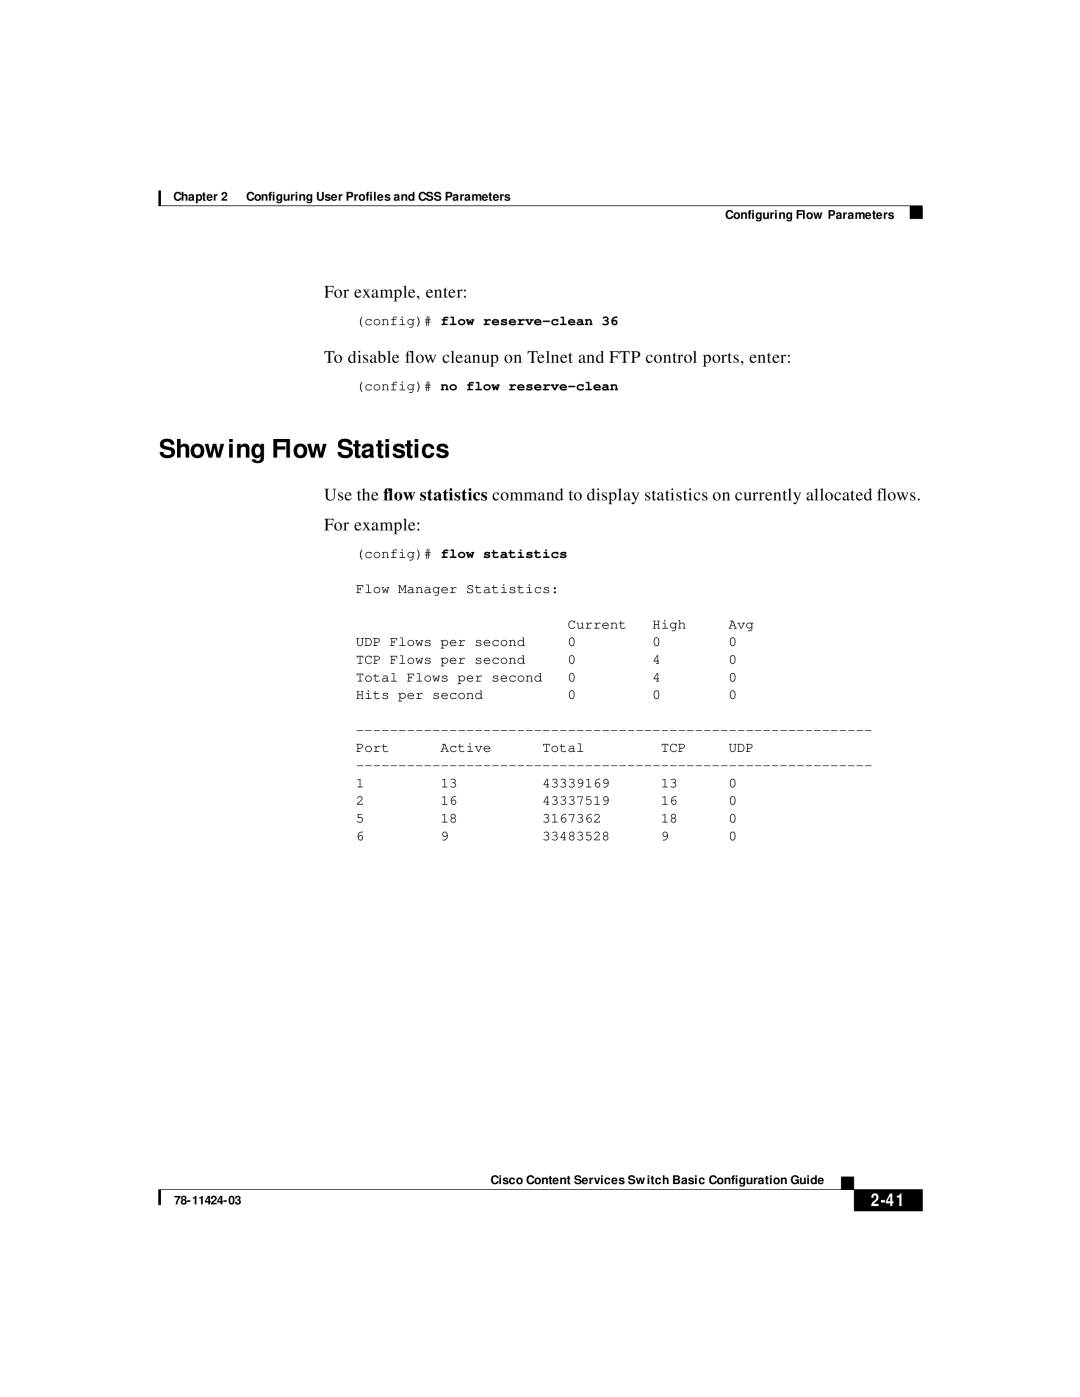 Cisco Systems 78-11424-03 manual Showing Flow Statistics, 2-41, Configuring User Profiles and CSS Parameters 